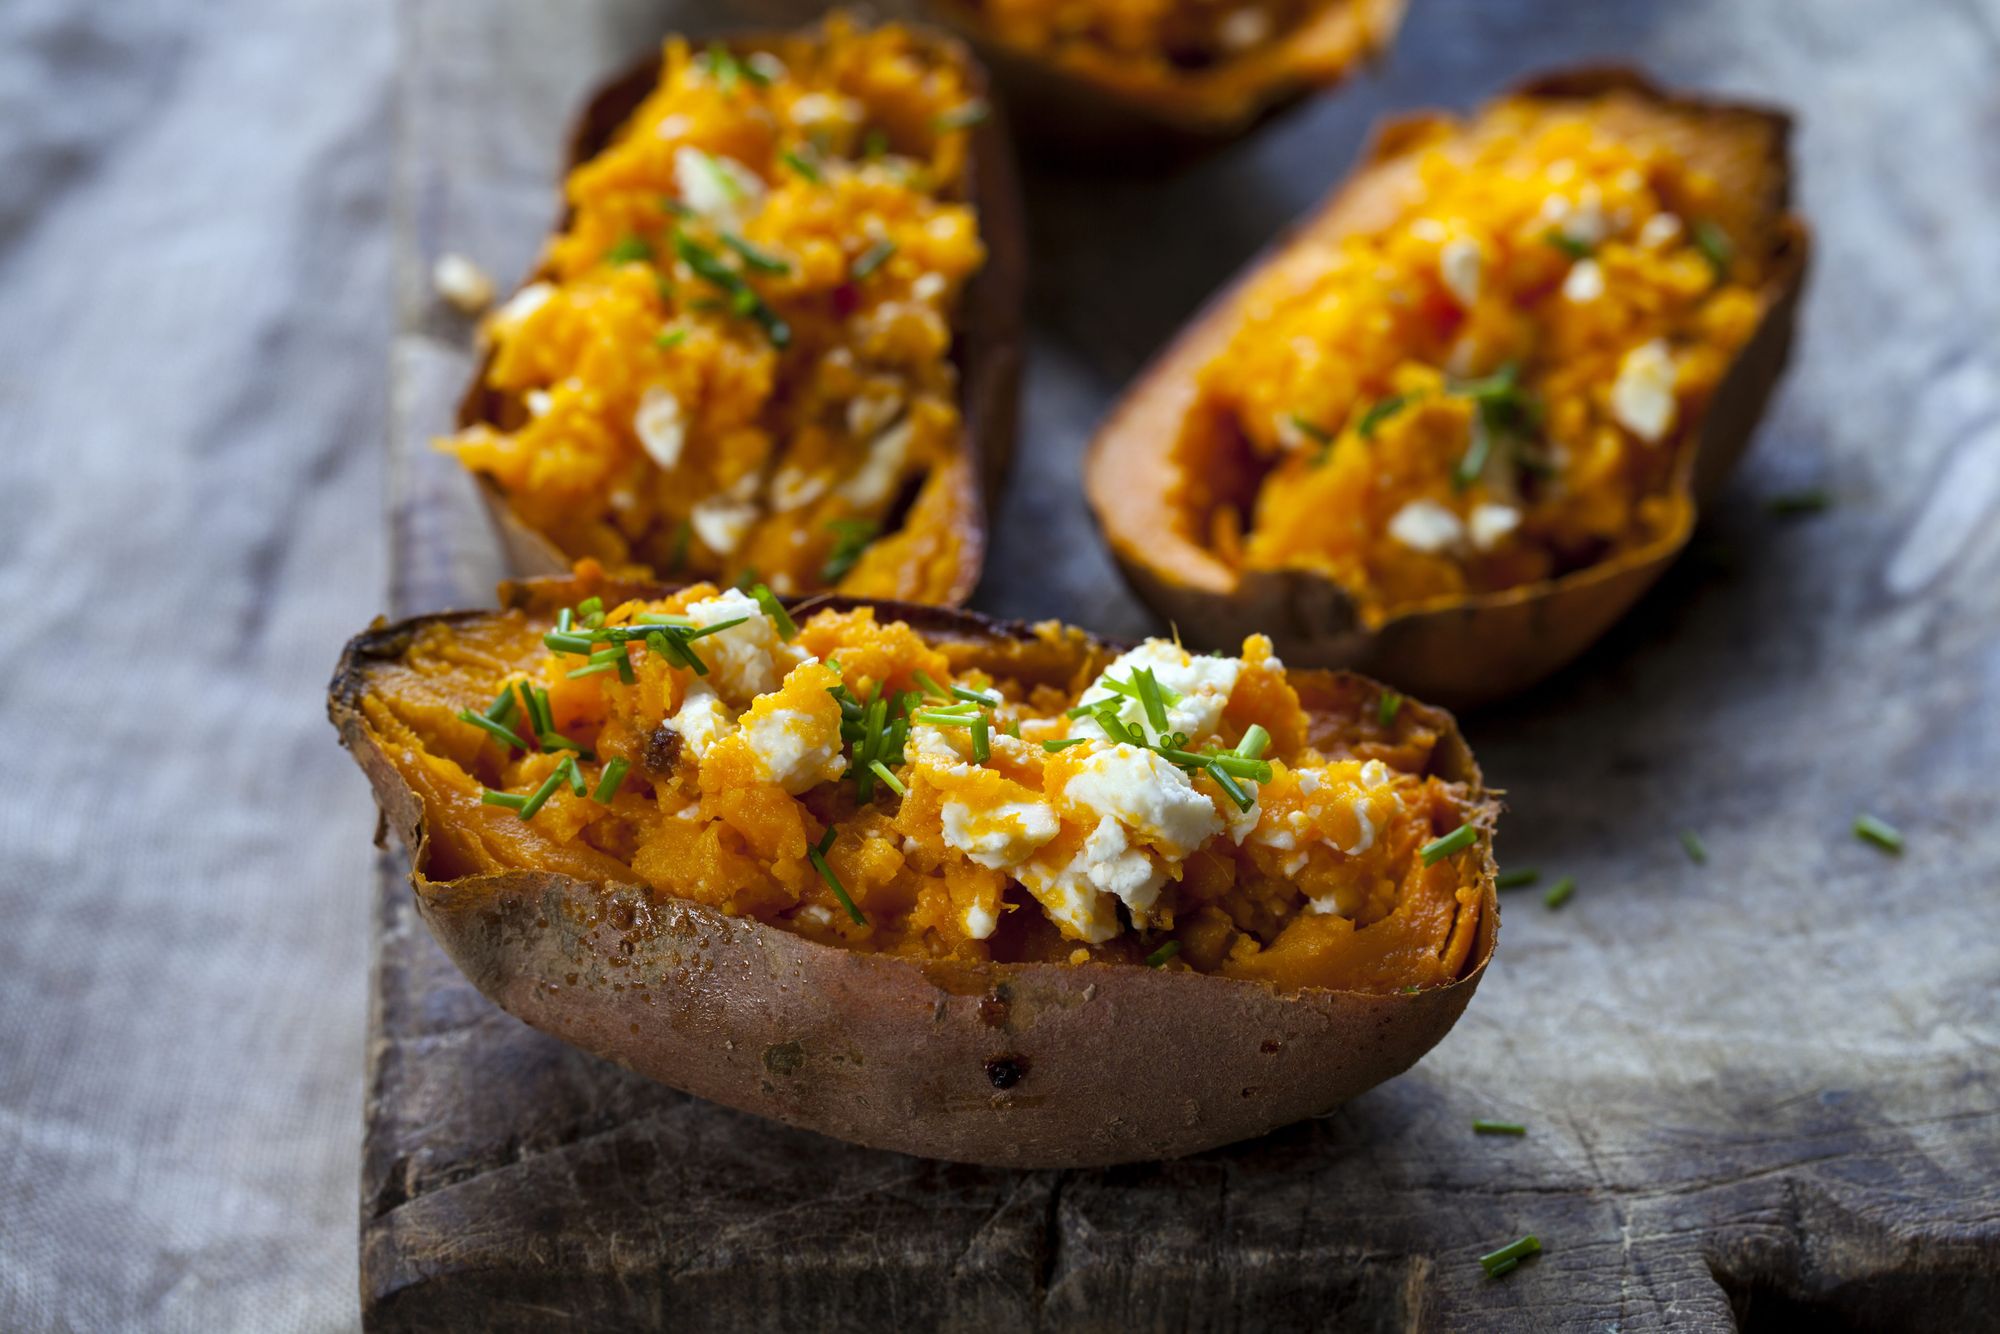 Baked sweet potato with feta cheese and chives